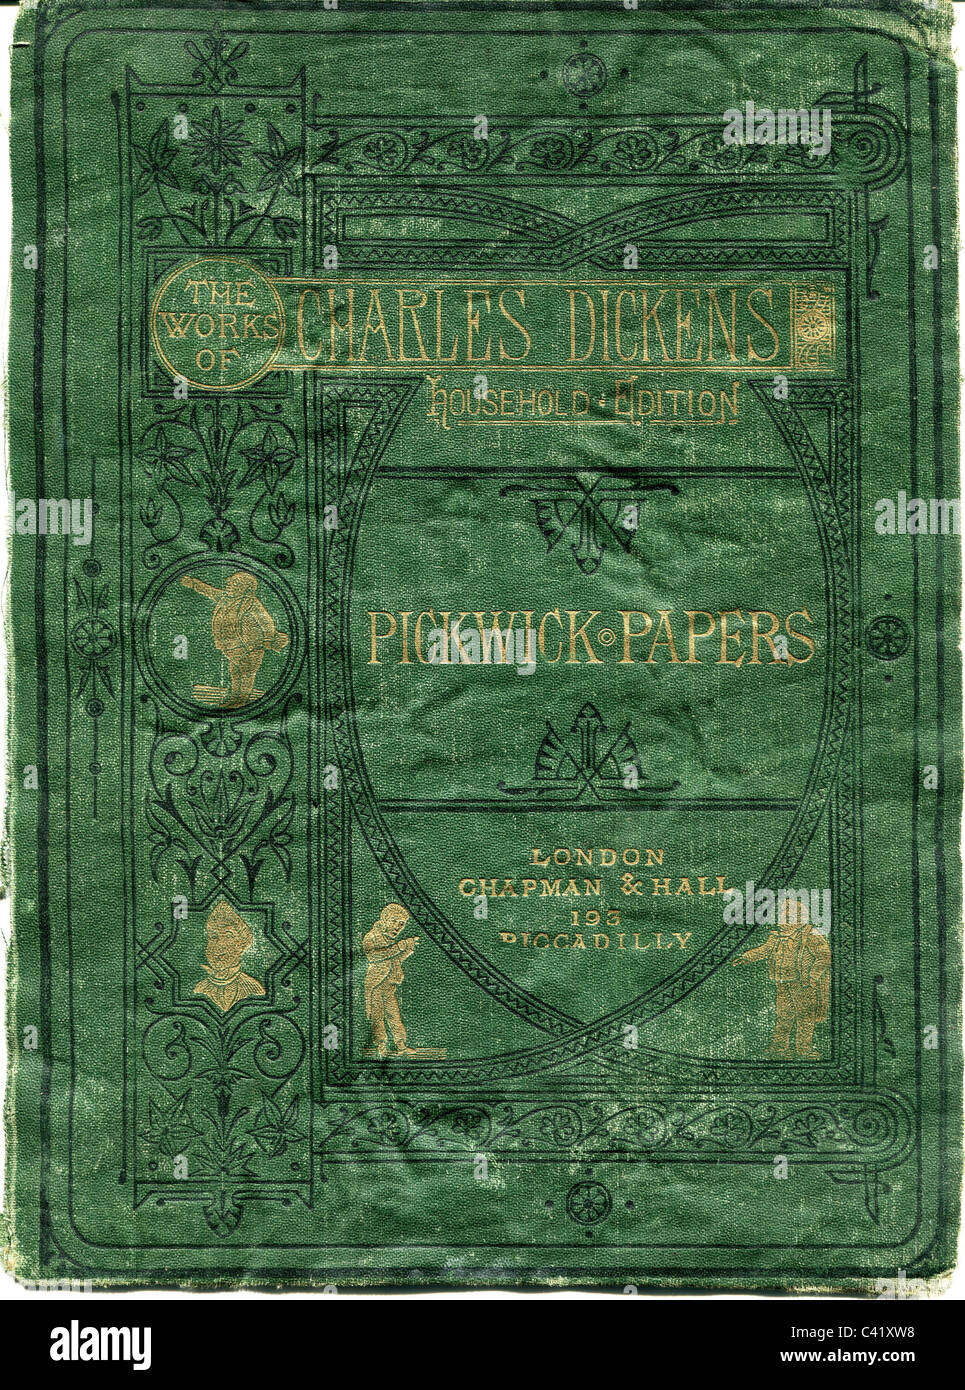 Dickens, Charles, 7.2.1812 - 9.7.1870, englischer Autor/Schriftsteller, Werke, "The Pickwick Papers", Household Edition, Chapman and Hall, London, 1871 - 1880, Cover, Stockfoto